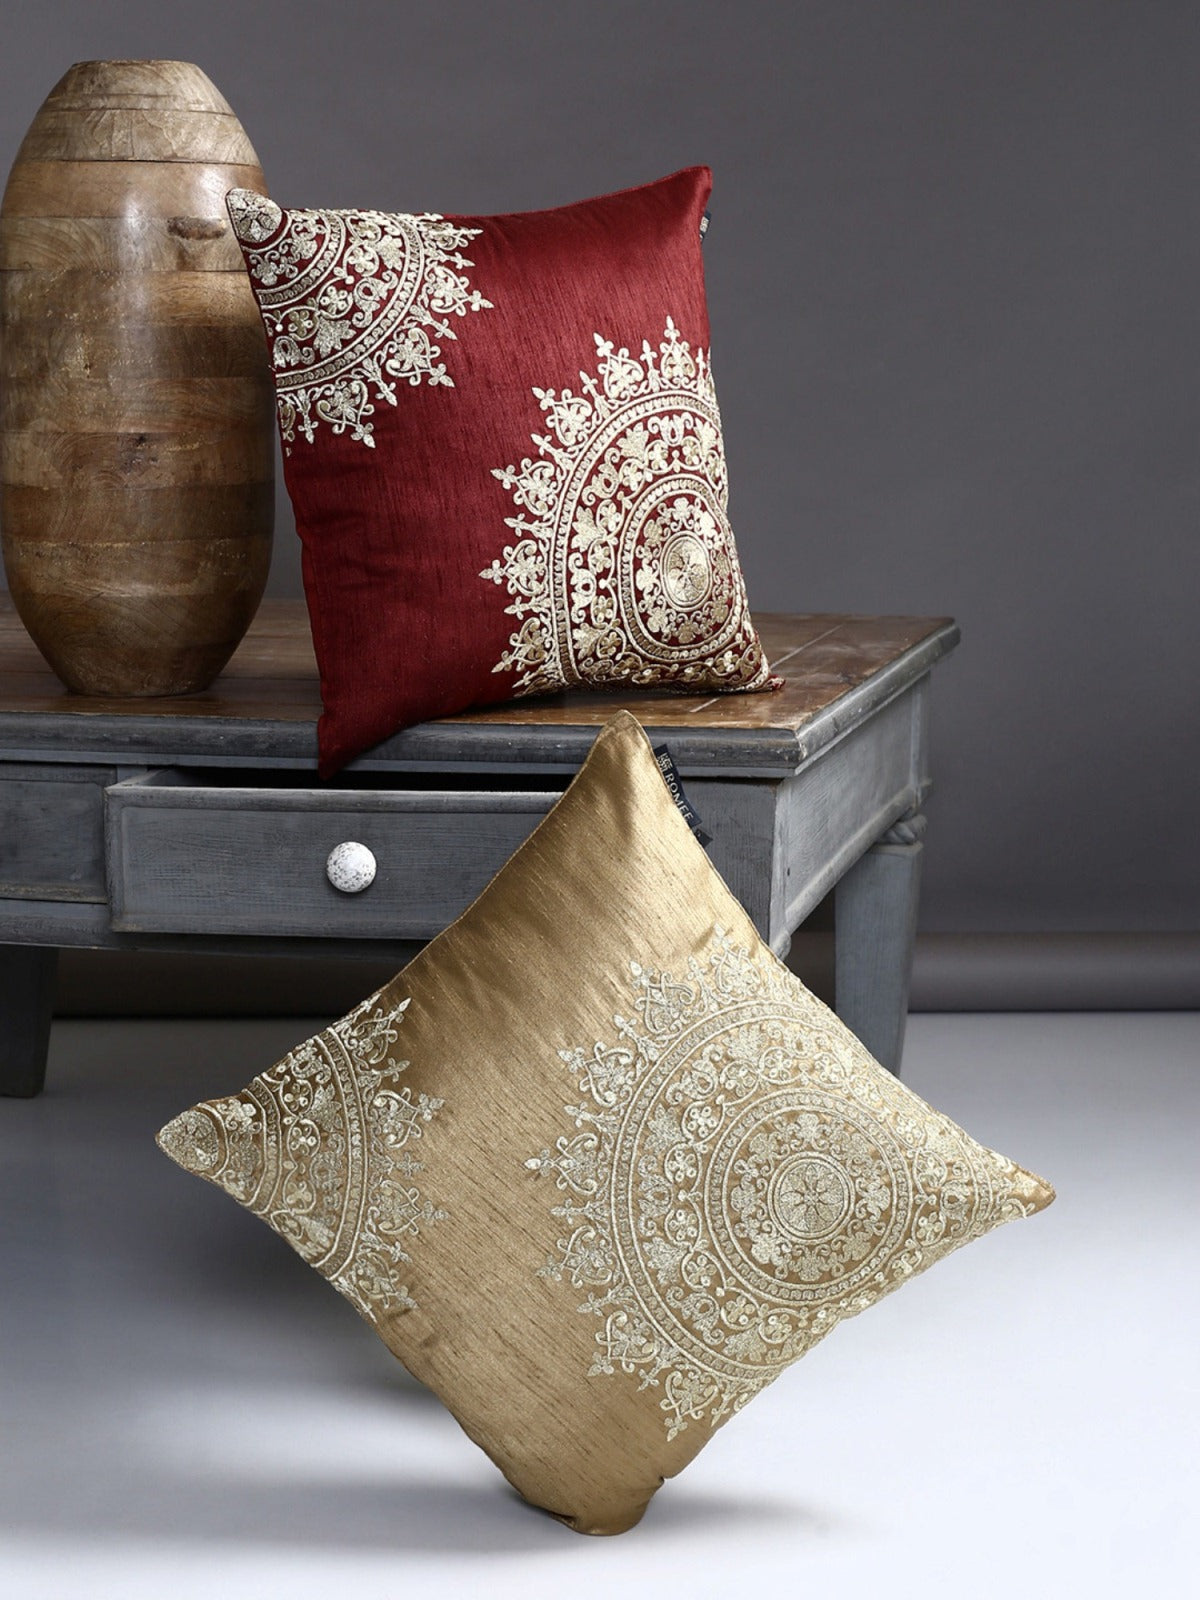 Embroidered 2 Piece Polyester Cushion Cover Set - 16" x 16", Maroon and Beige